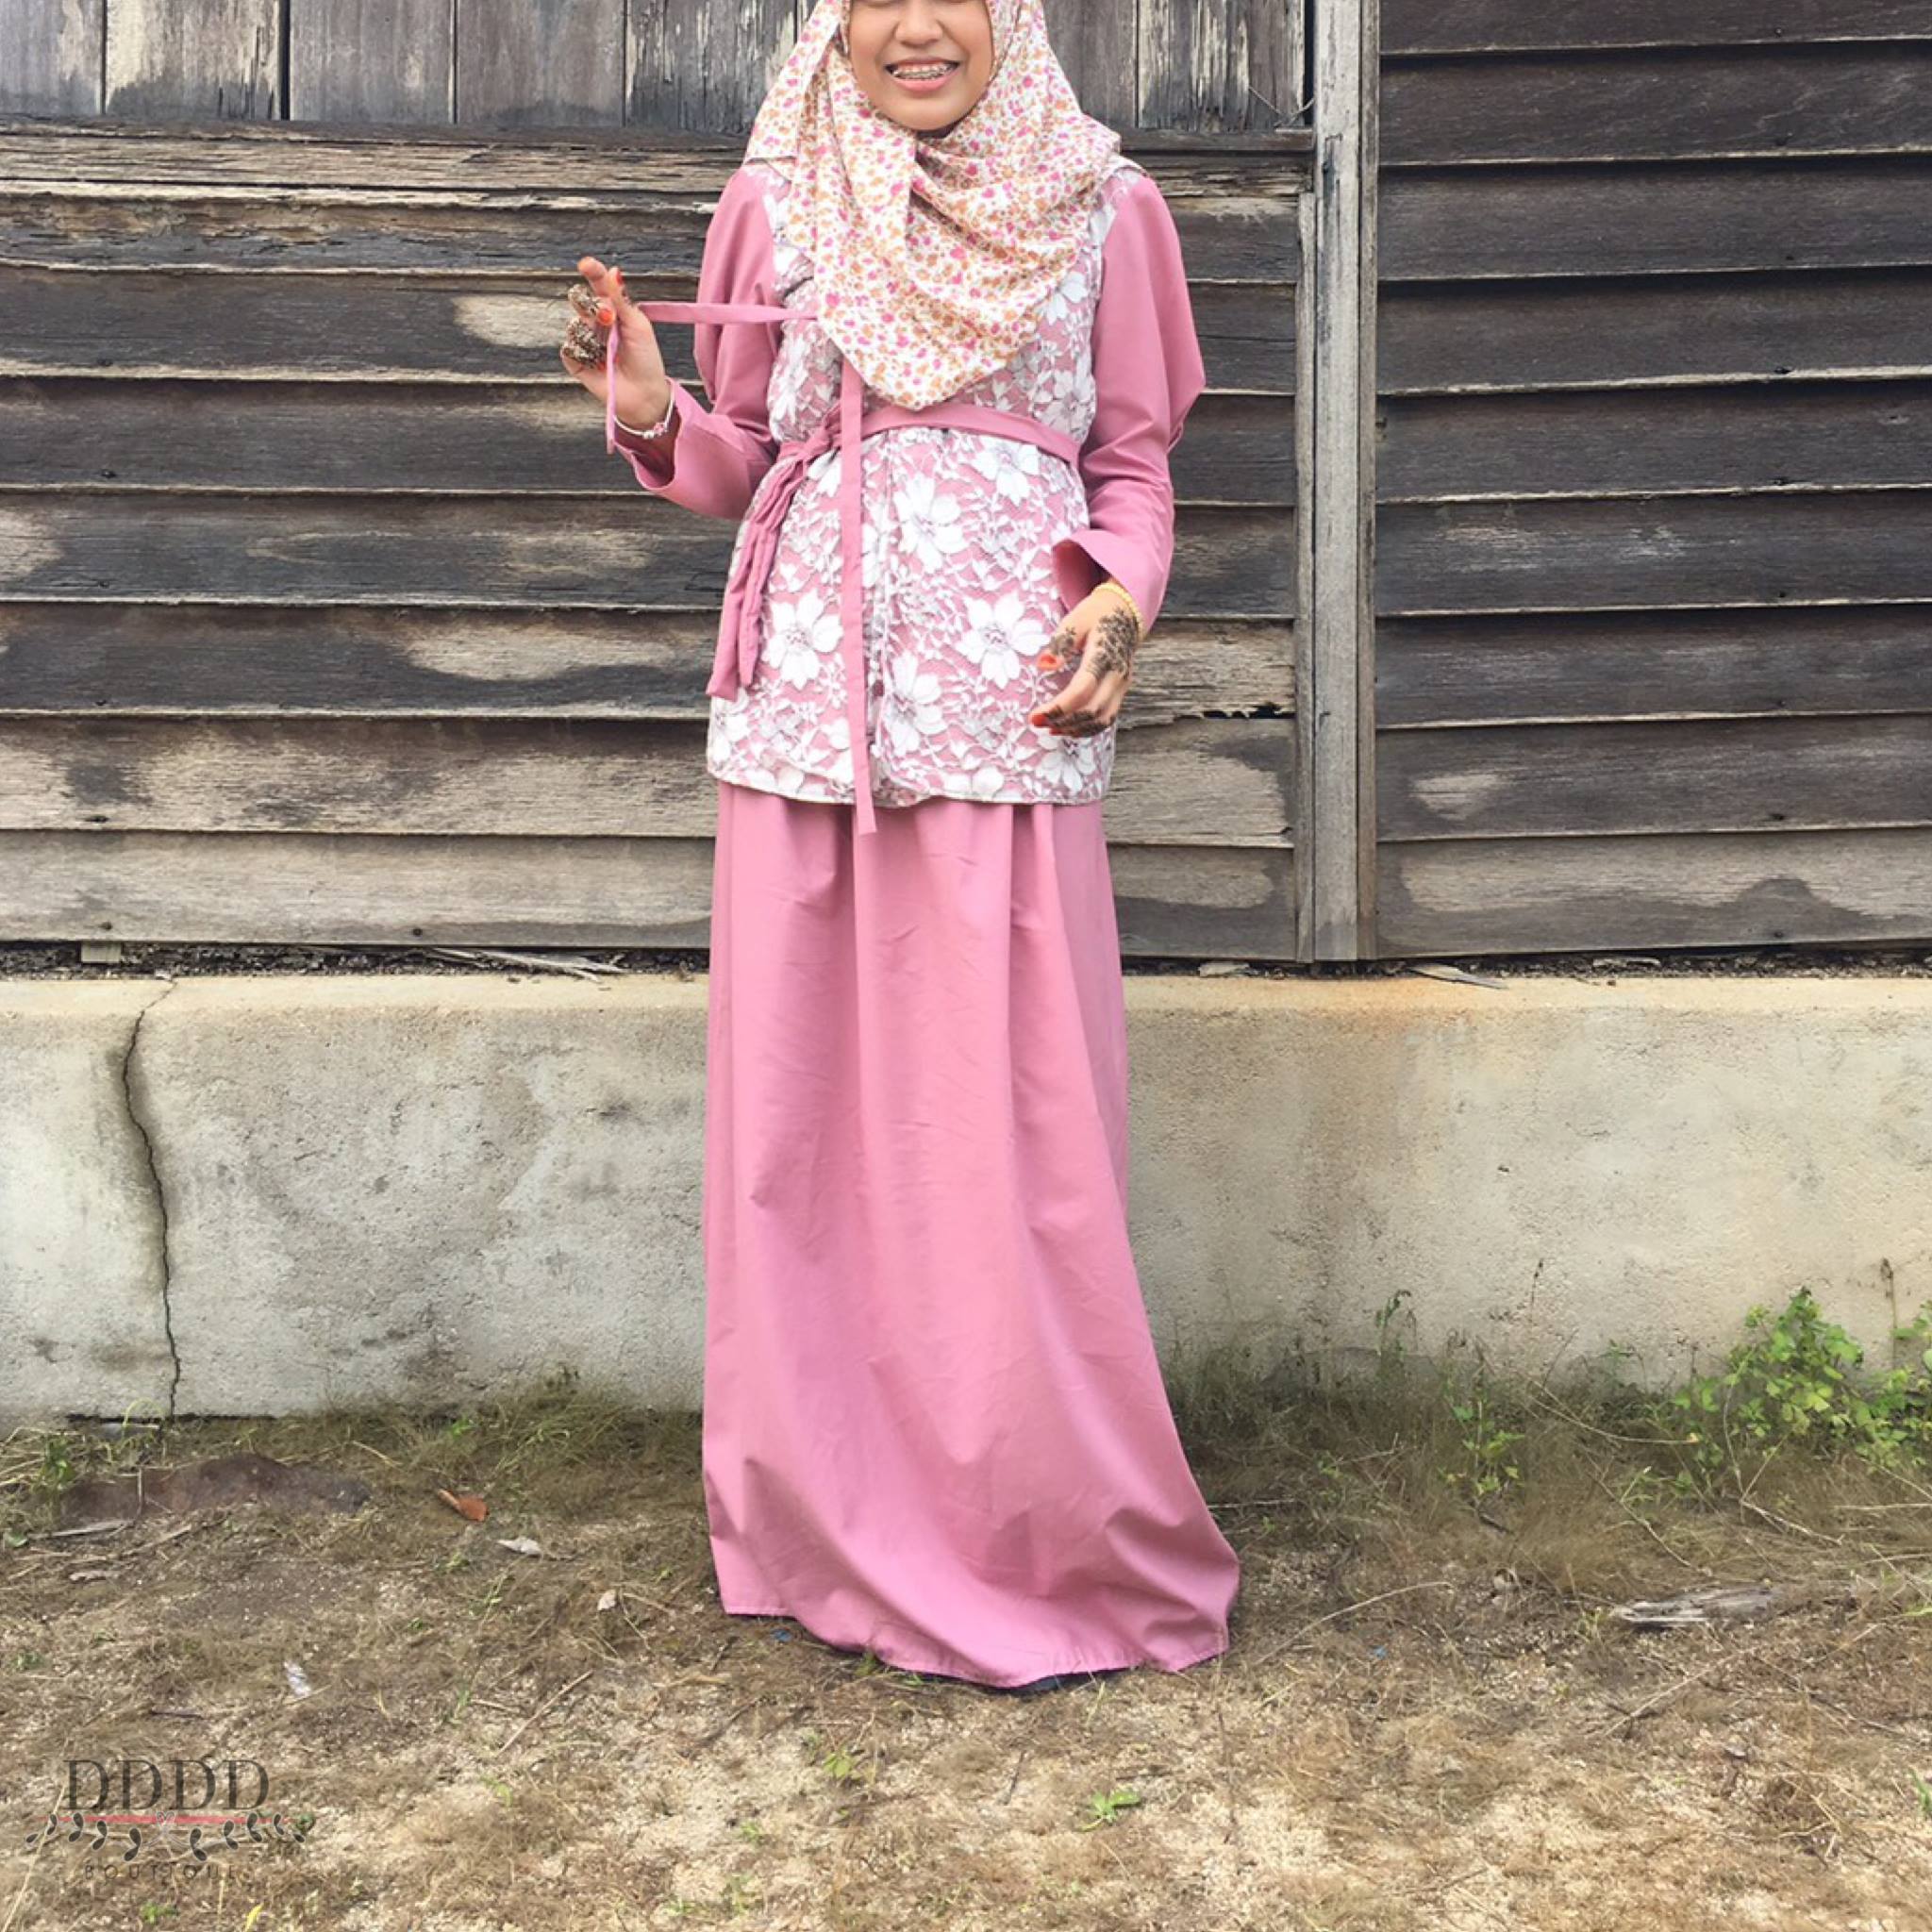 Mrs. N in Made-to-measure DDDD Raya piece. A fusion of Kebaya and Hanbok!